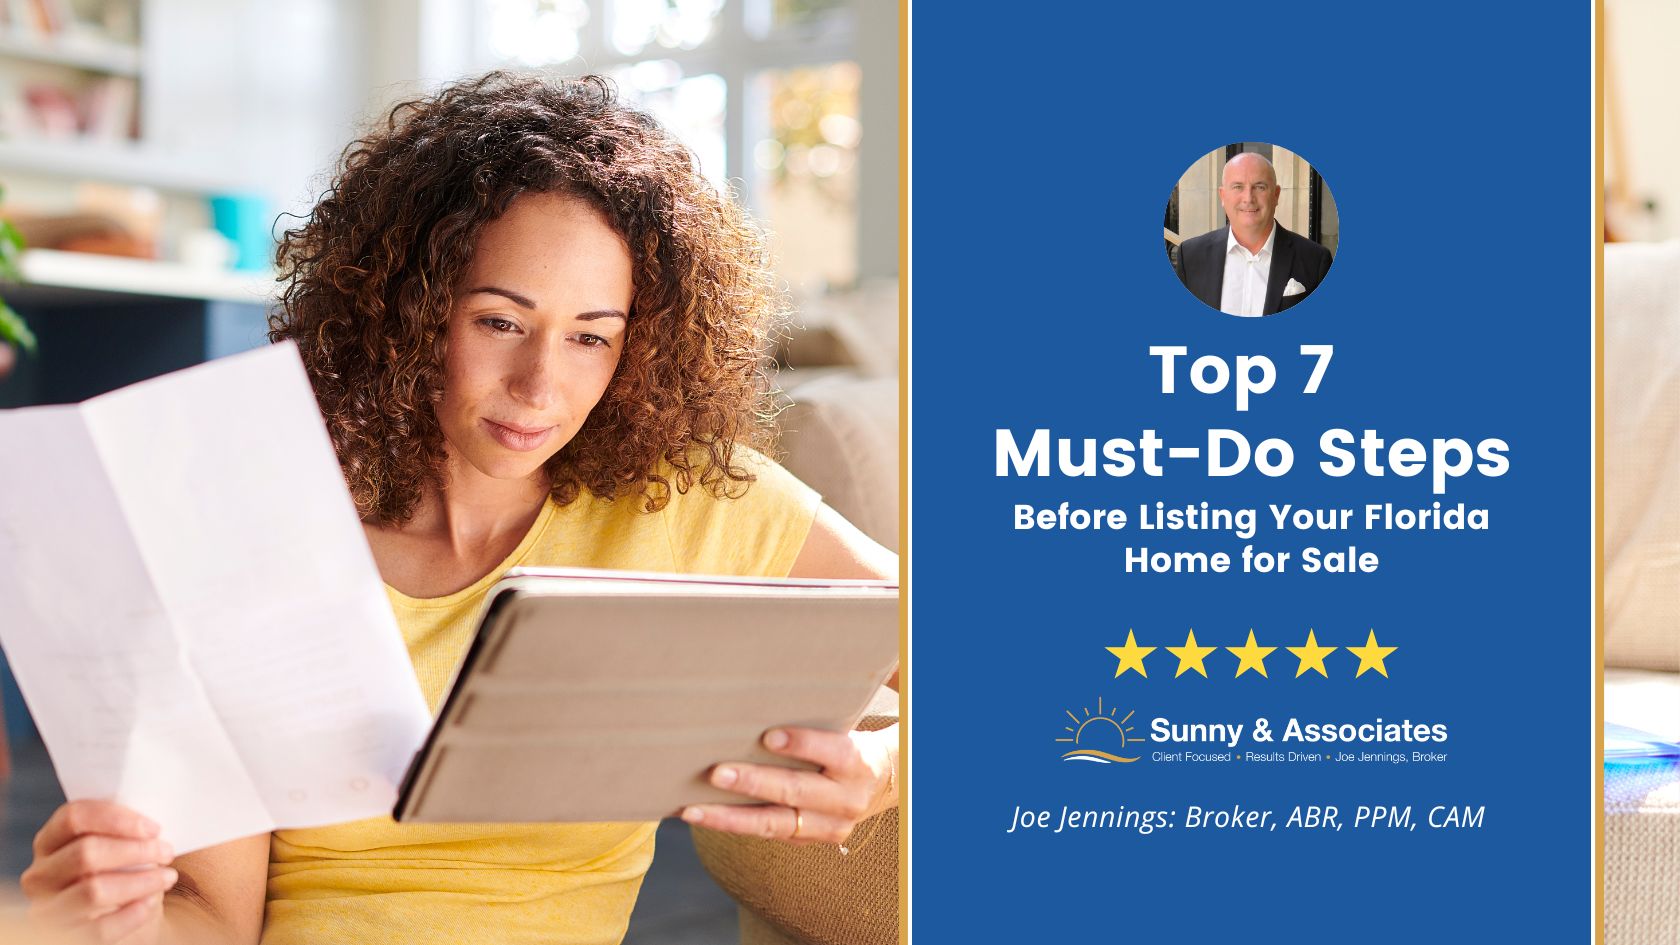 Top 7 Must-Do Steps Before Listing Your Florida Home for Sale